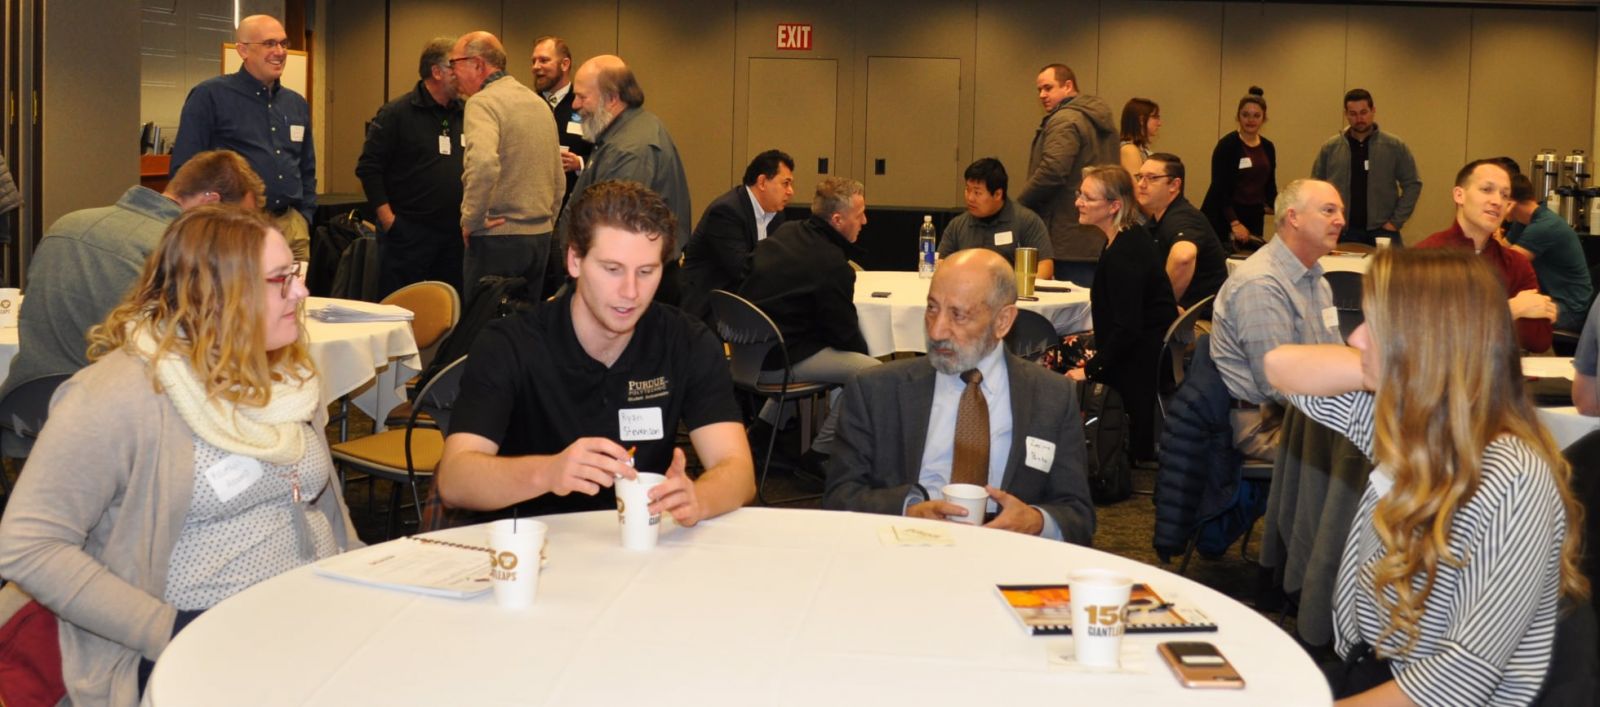 Students, faculty and industry representatives networking at the ISHE/ASHE conference